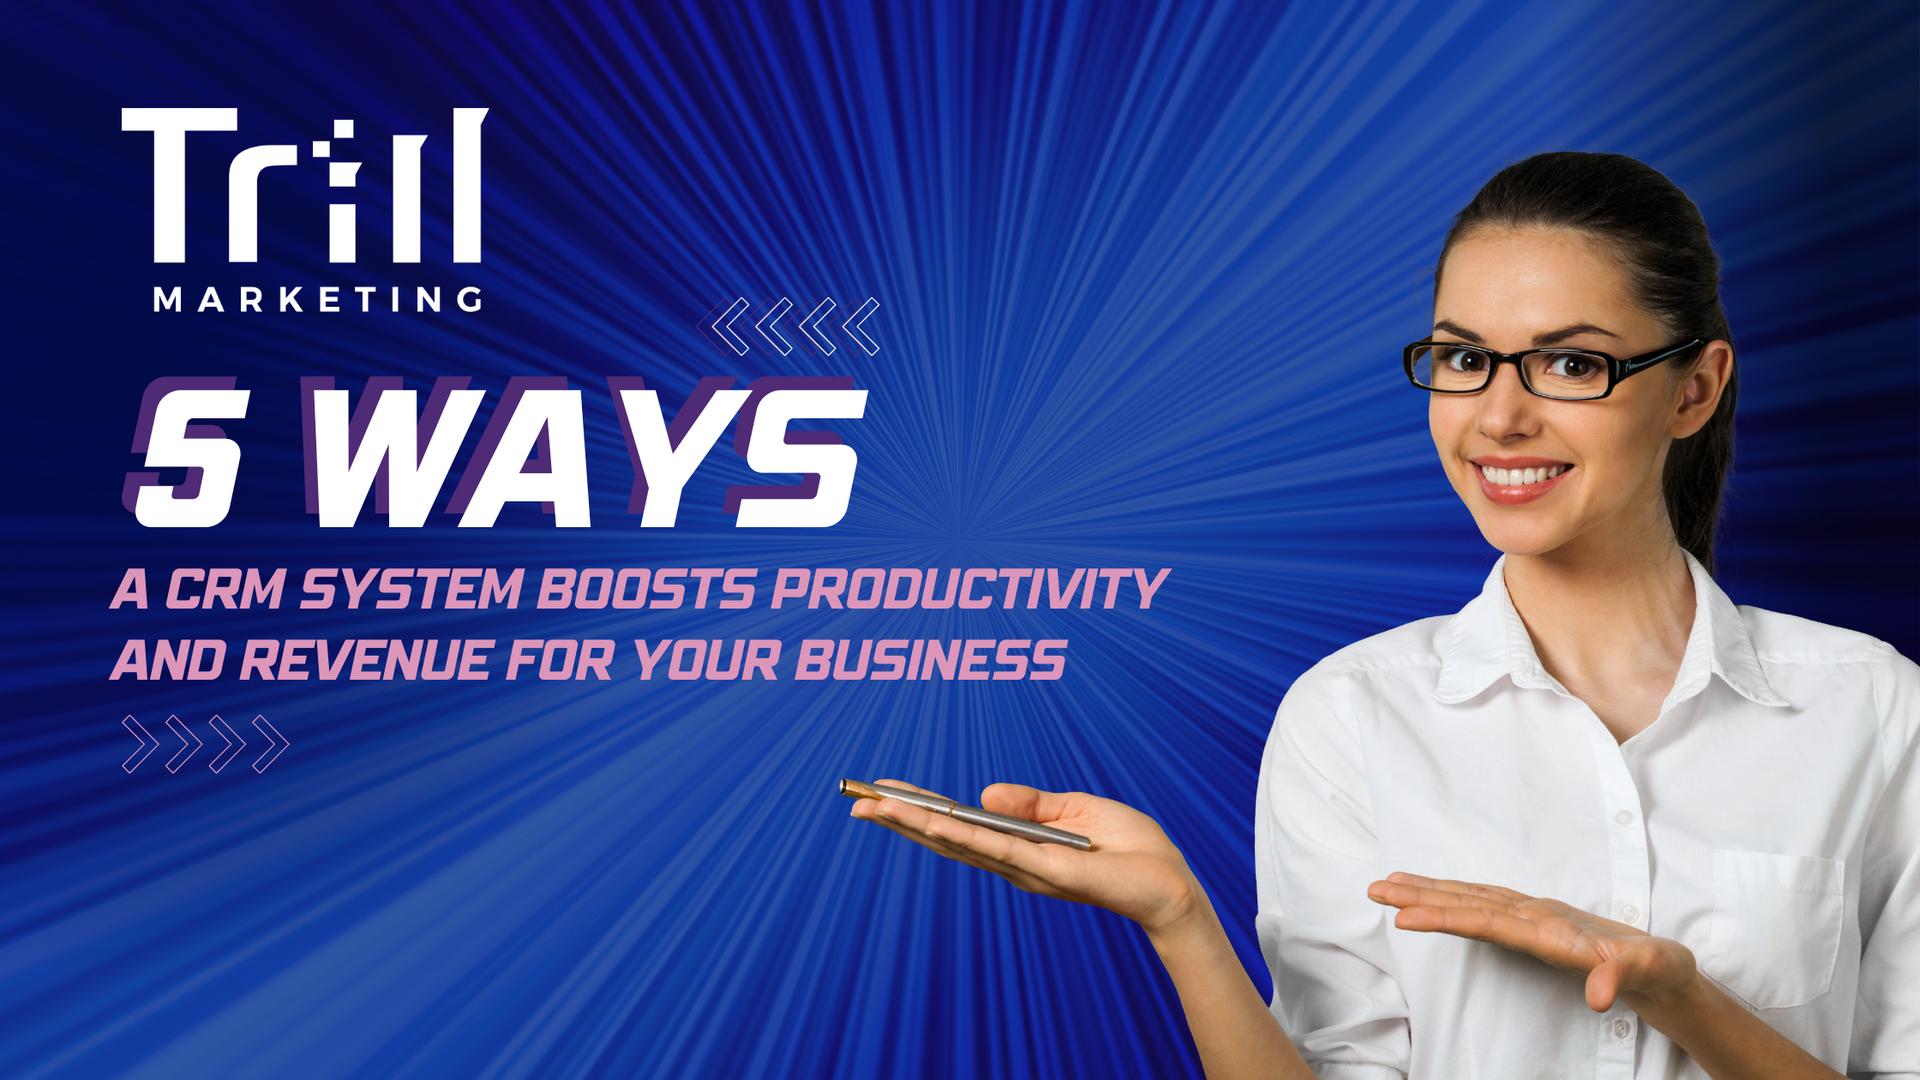 5 Ways a CRM System Boosts Productivity and Revenue